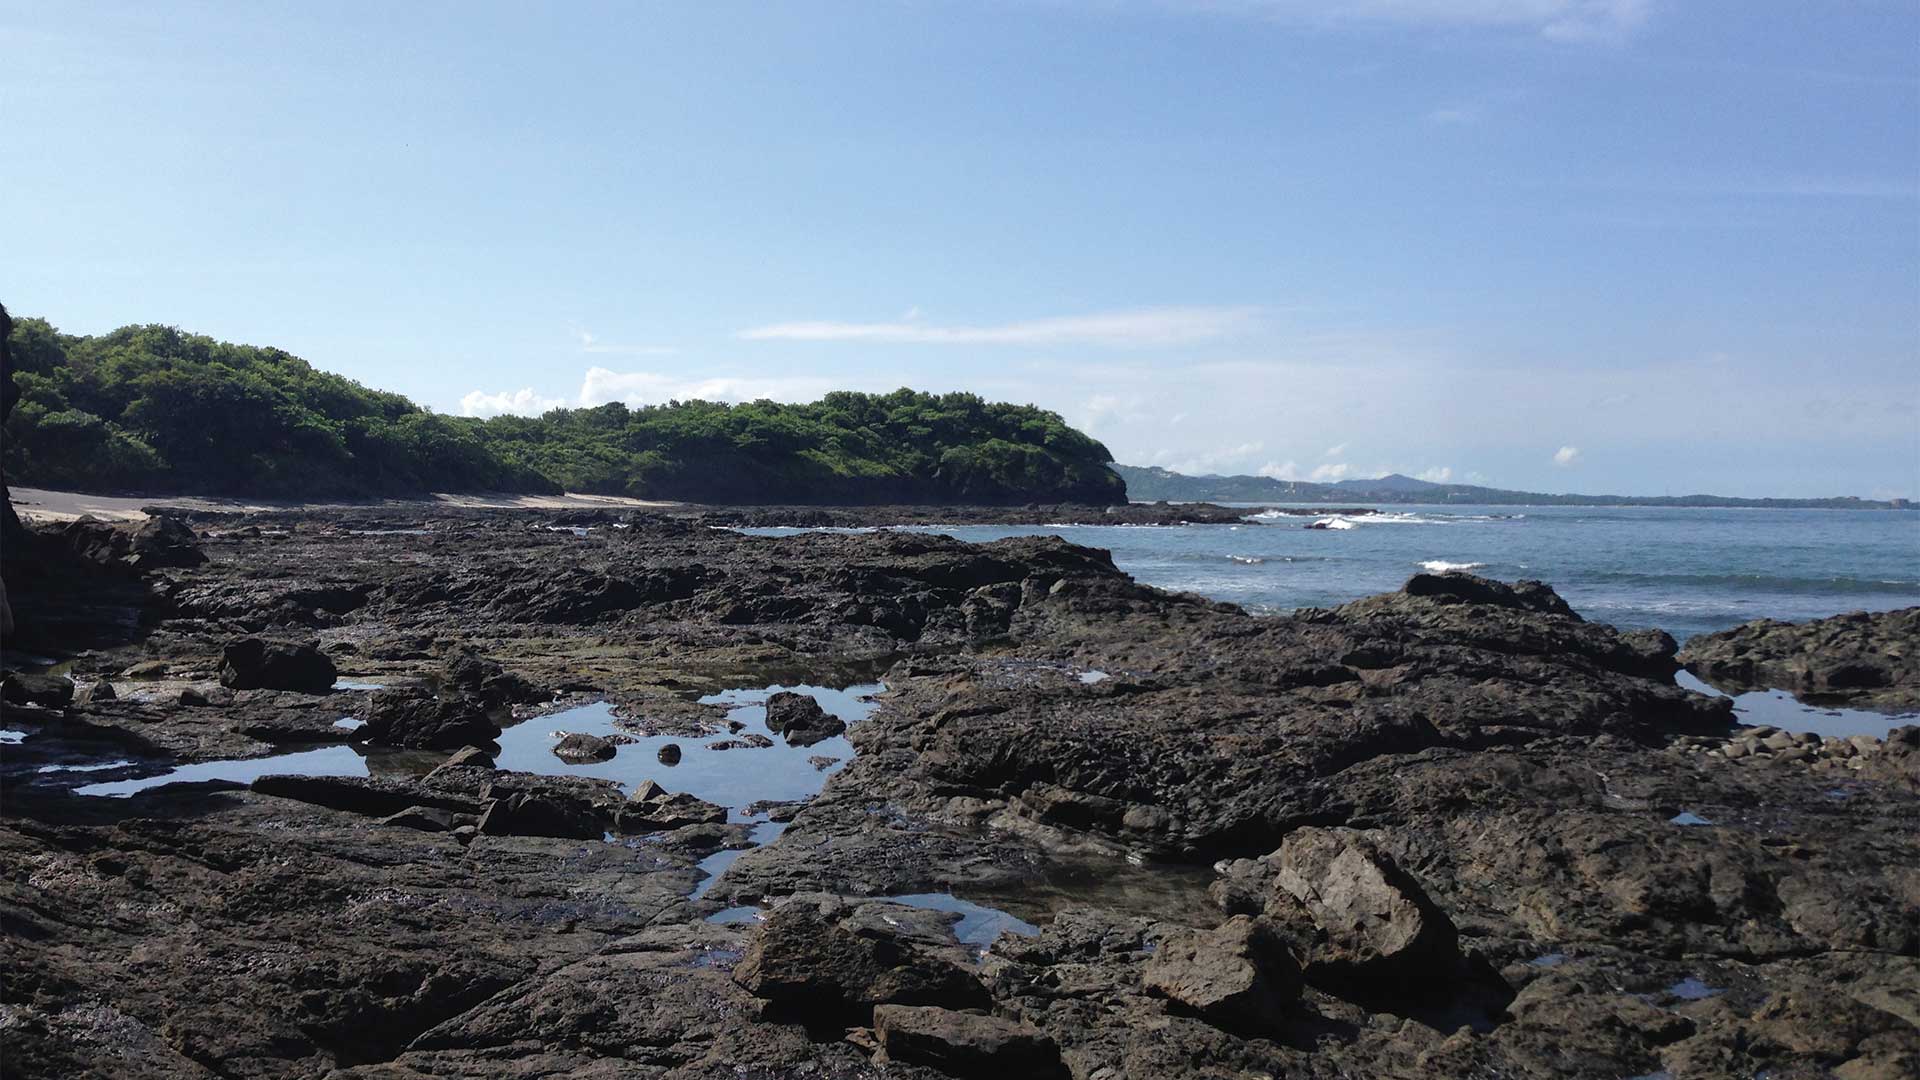 Black rocky beach with tide pools at Playa Carbon in Guanacaste, Costa Rica